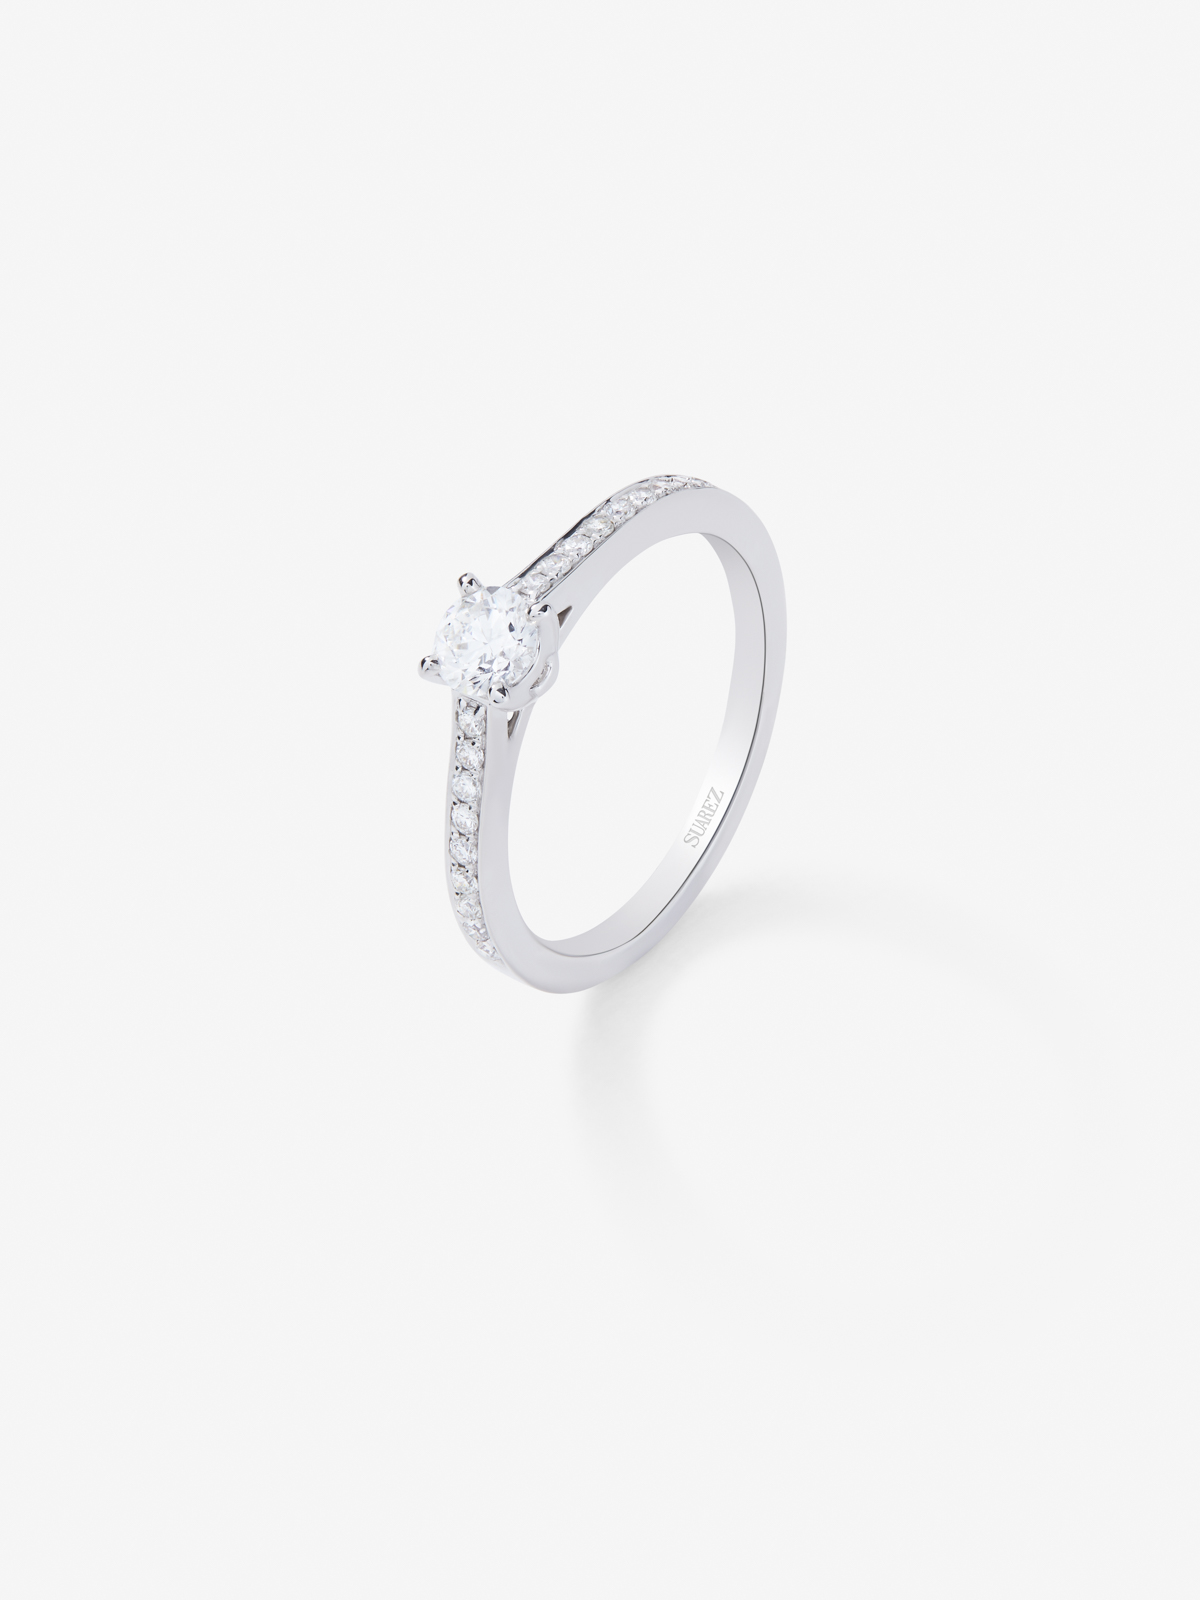 18K white gold engagement solitaire ring with diamond